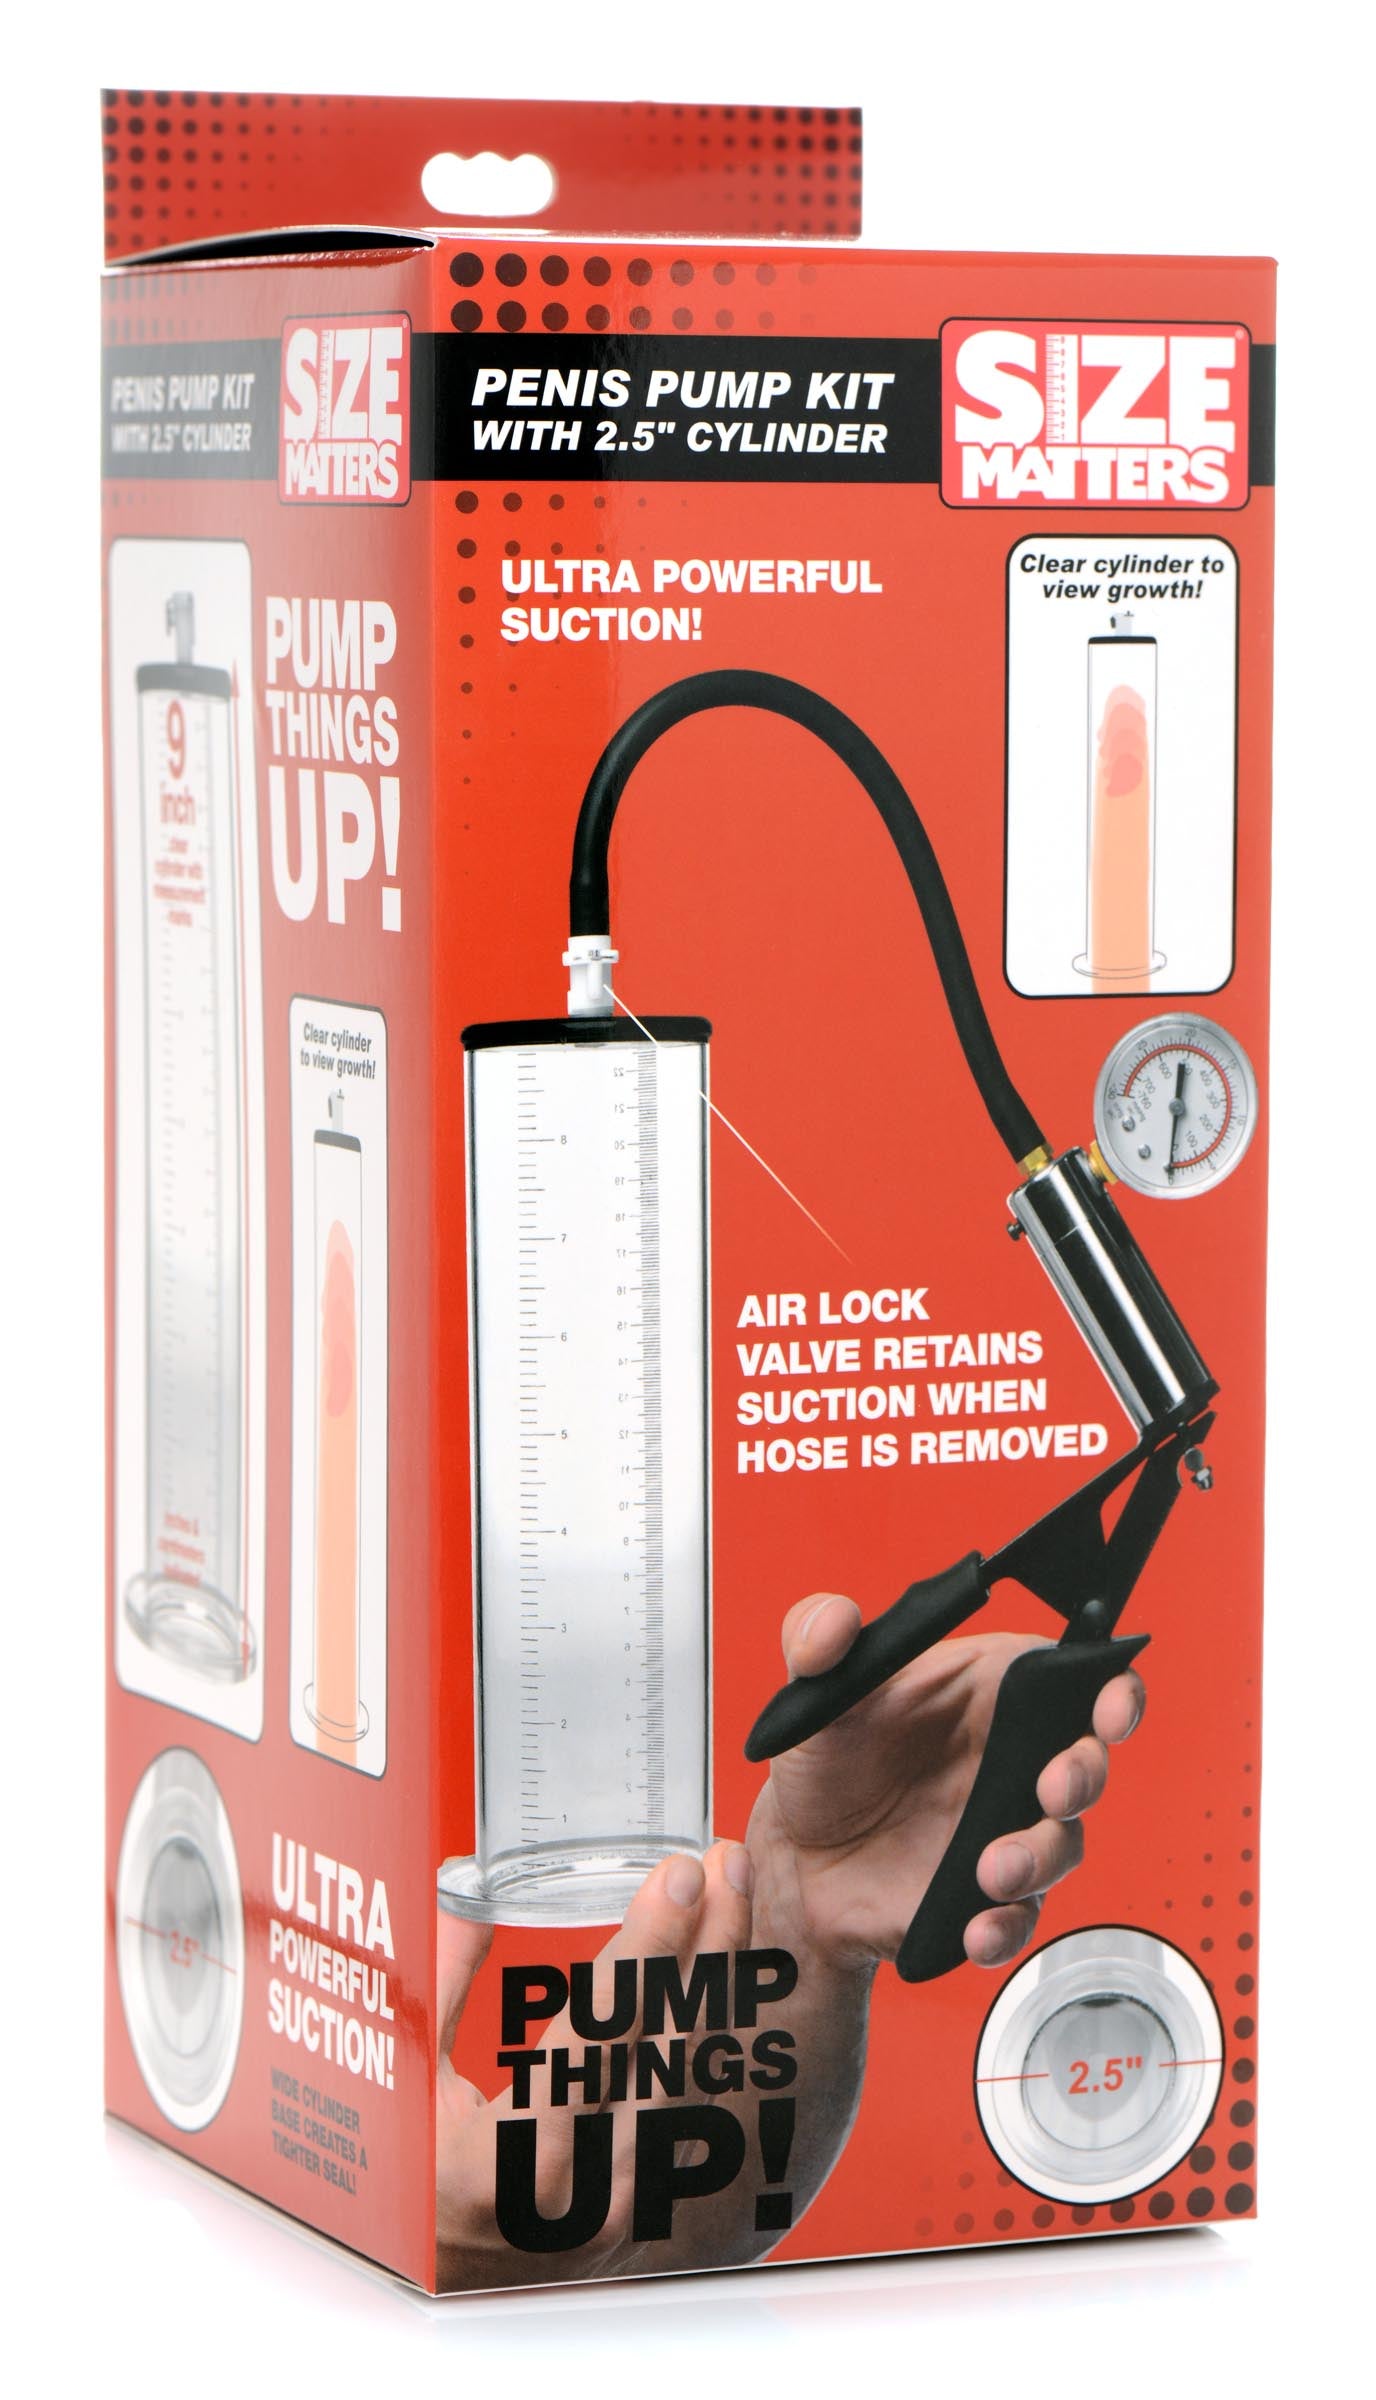 Penis Pump Kit with 2.5 Inch Cylinder